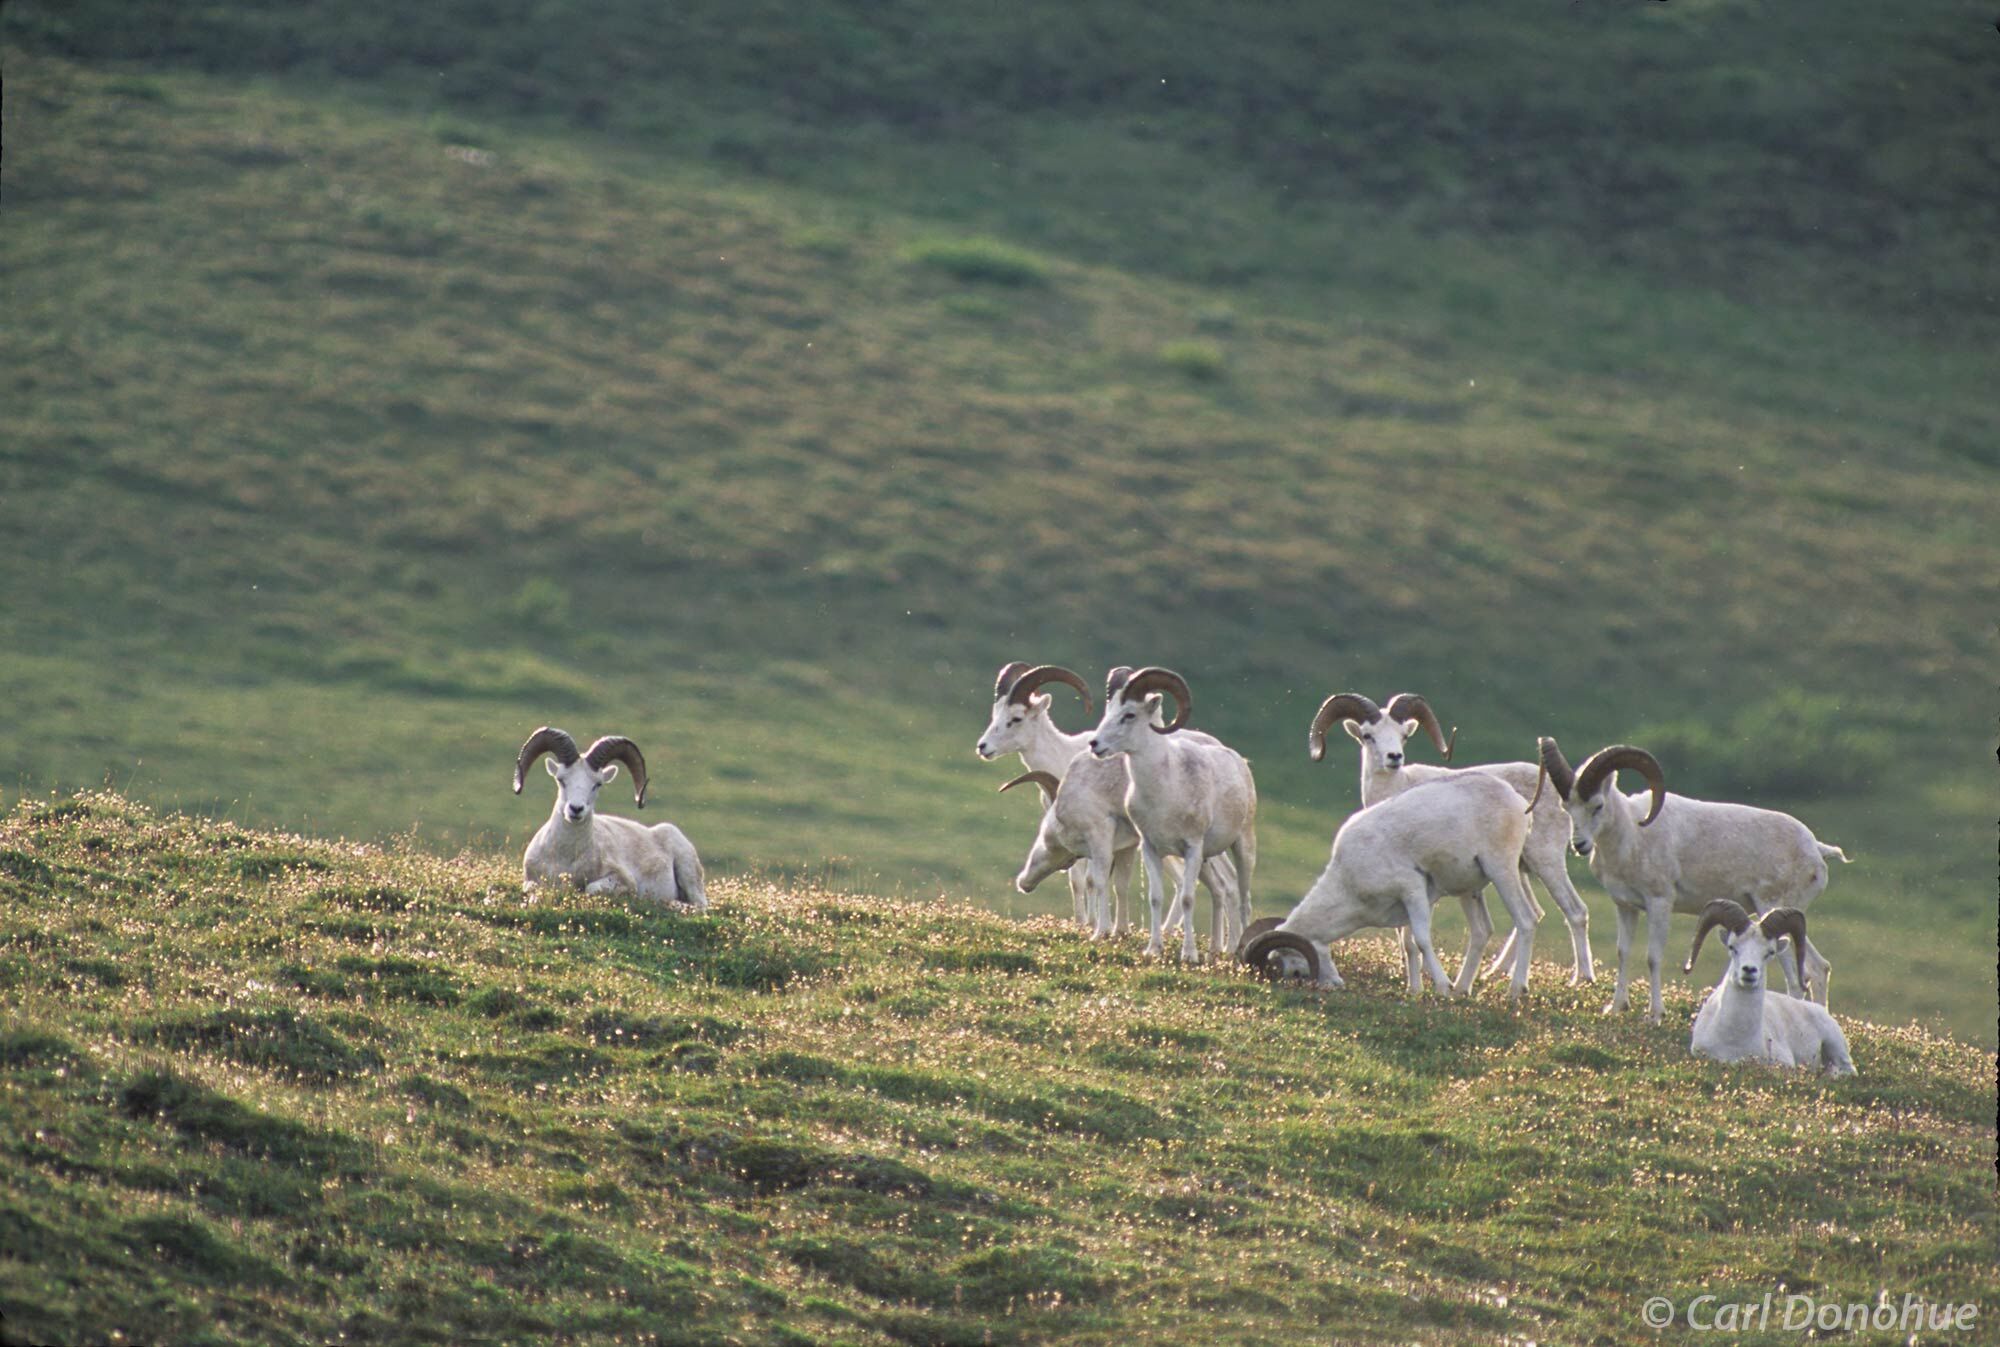 A band of Dall sheep rams, (Ovis dalli dalli) or Dahl's sheep, rams, stand on the tundra of MacColl Ridge, in Wrangell-St. Elias...